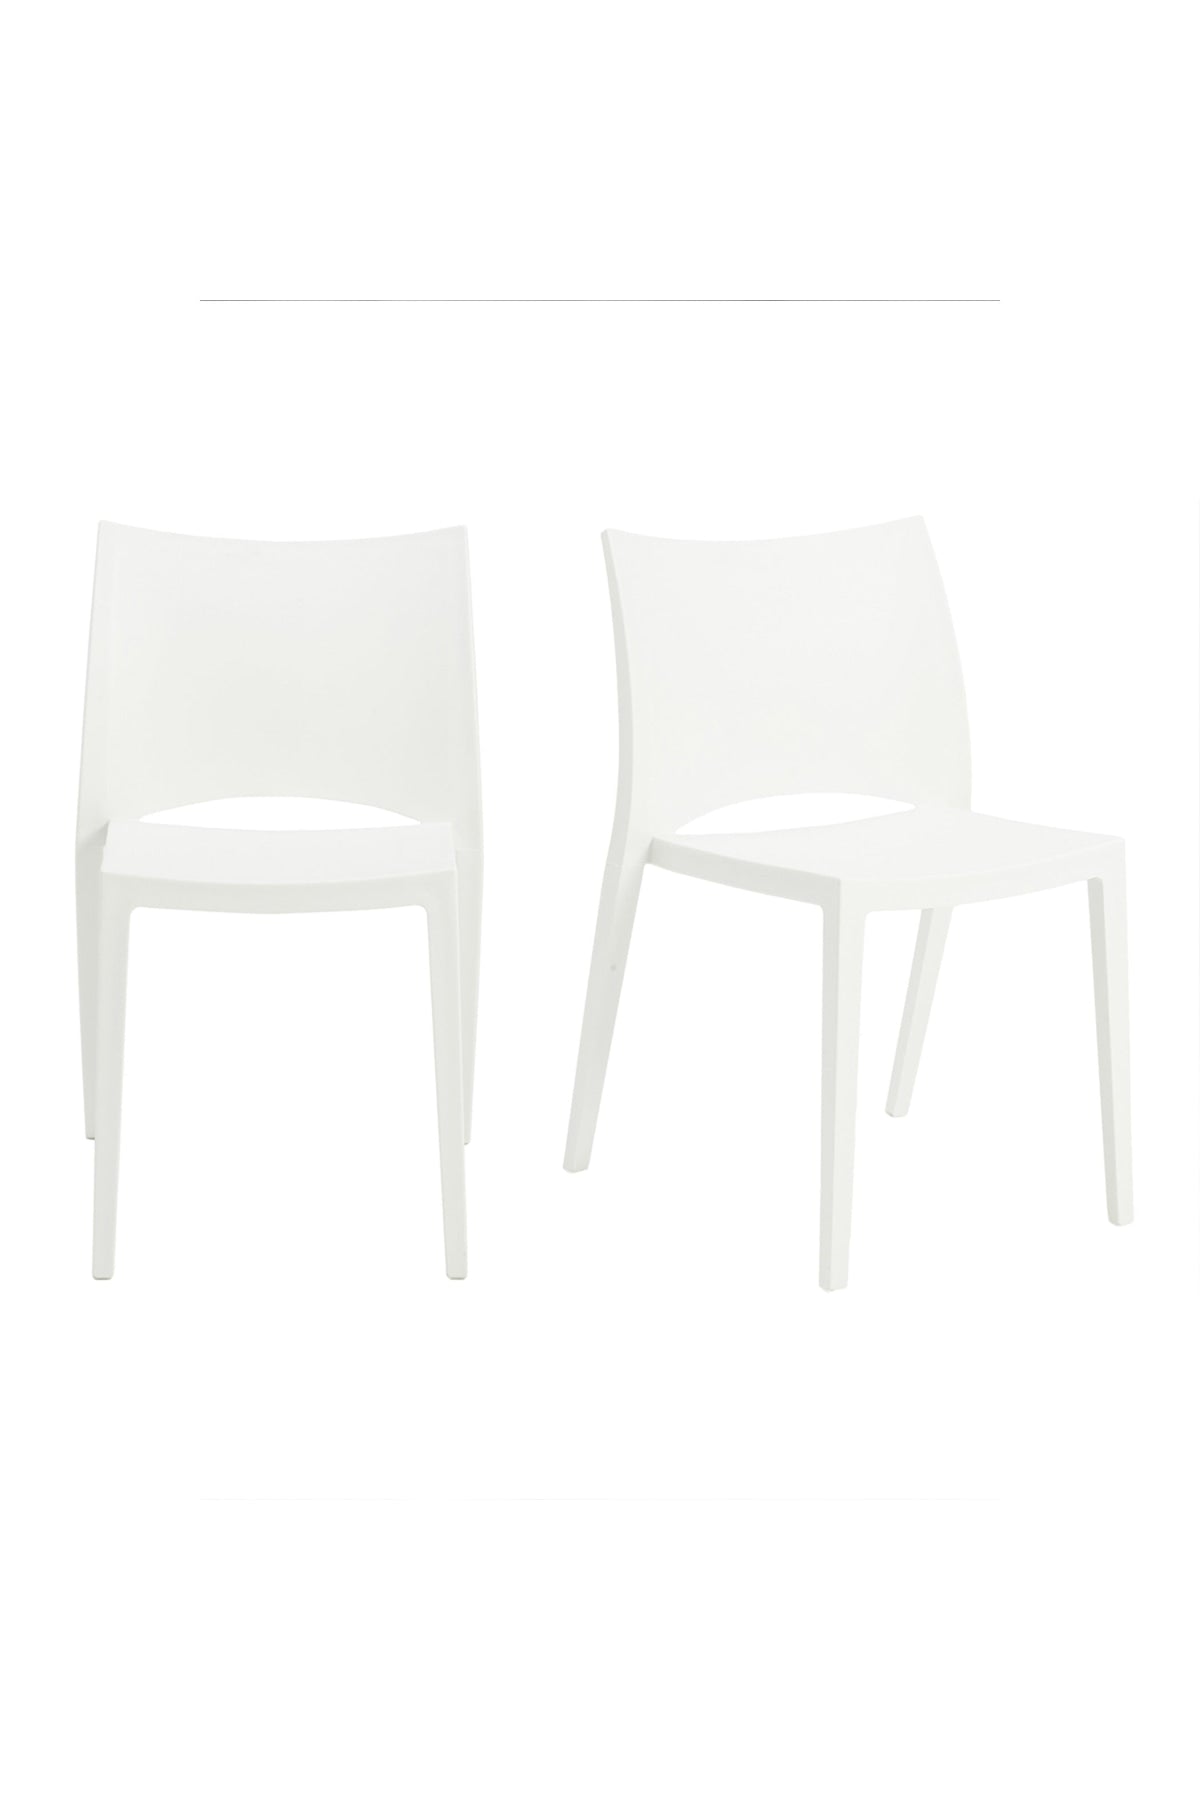 Boman Stacking Chair in White - Set of 2